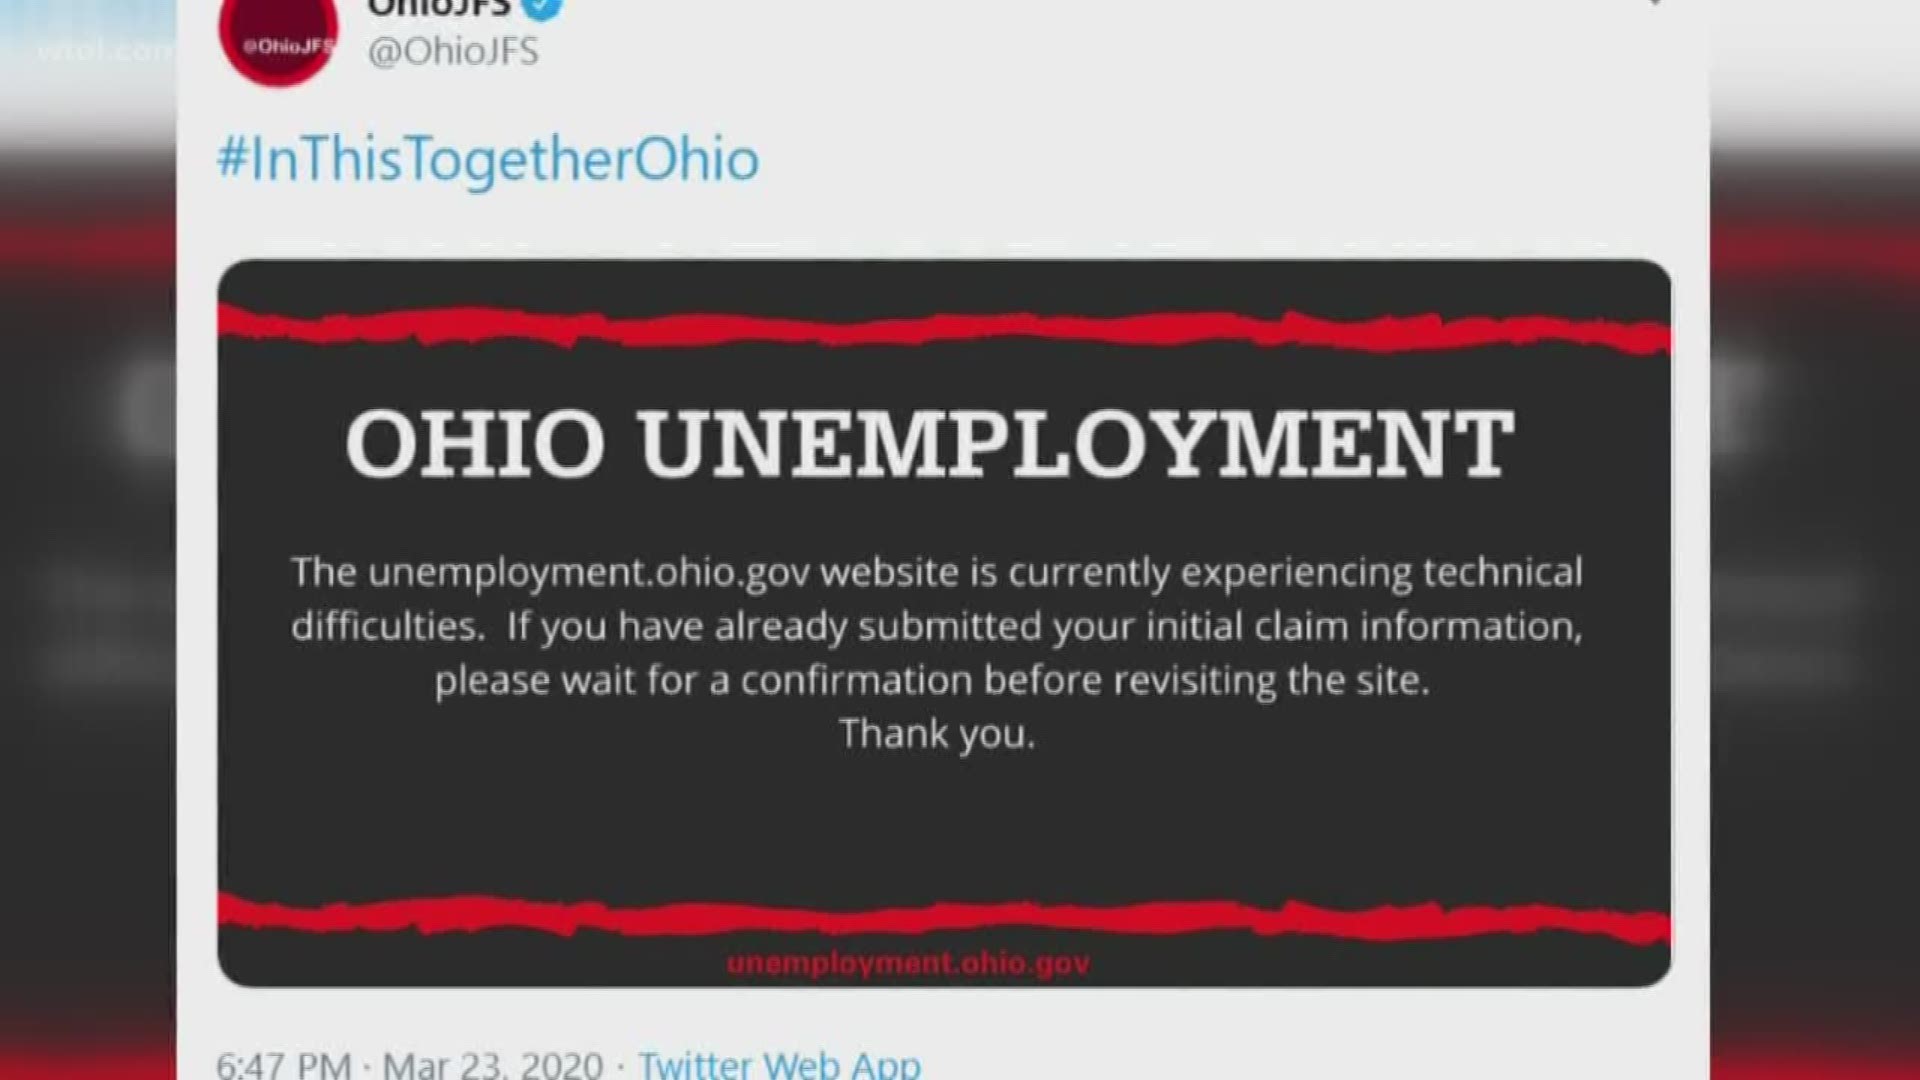 The Ohio Department of Job and Family Services has been swamped with calls and online submissions to file for unemployment due to the coronavirus outbreak.